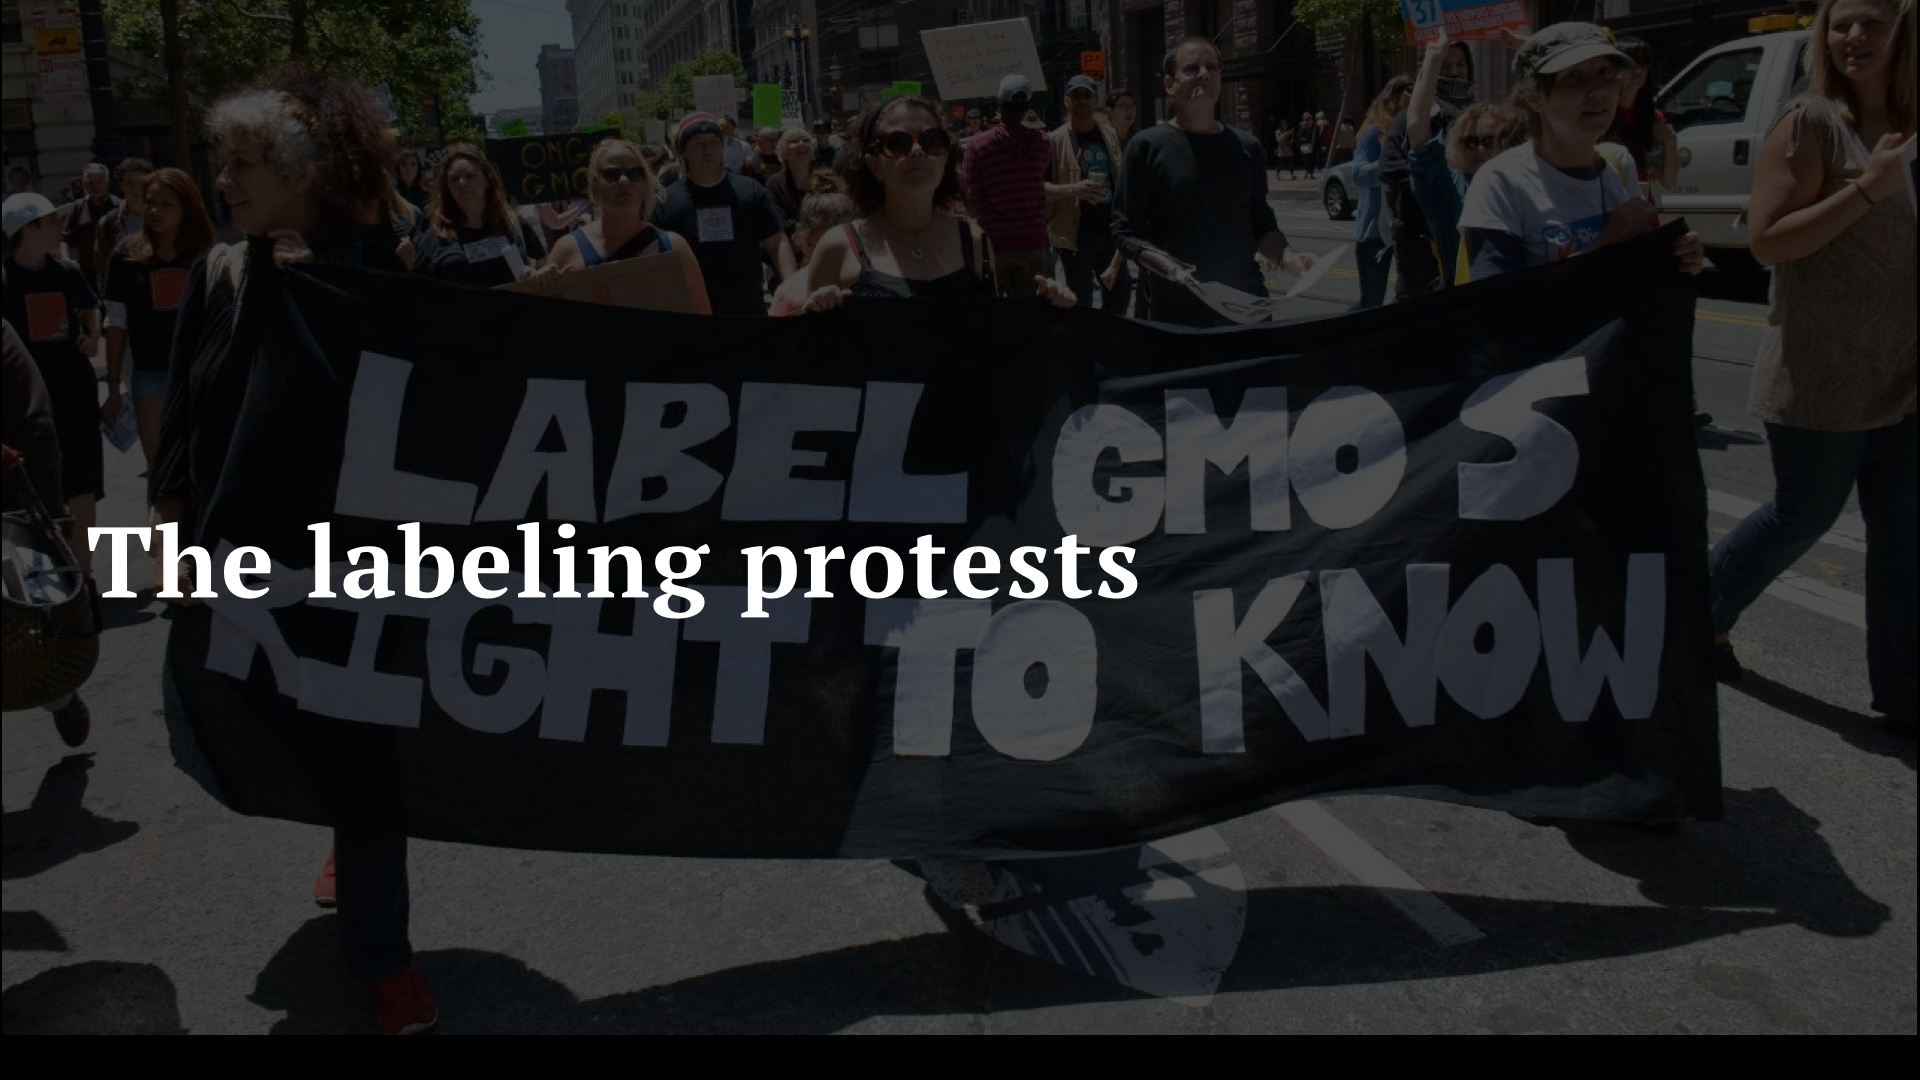  GMOs have put the American people in a state of outrage, leading to strong protests around mandatory GMO-labelling. And in response the Big Food companies have done little to add clarity and transparency to these issues. Labelling in America continu